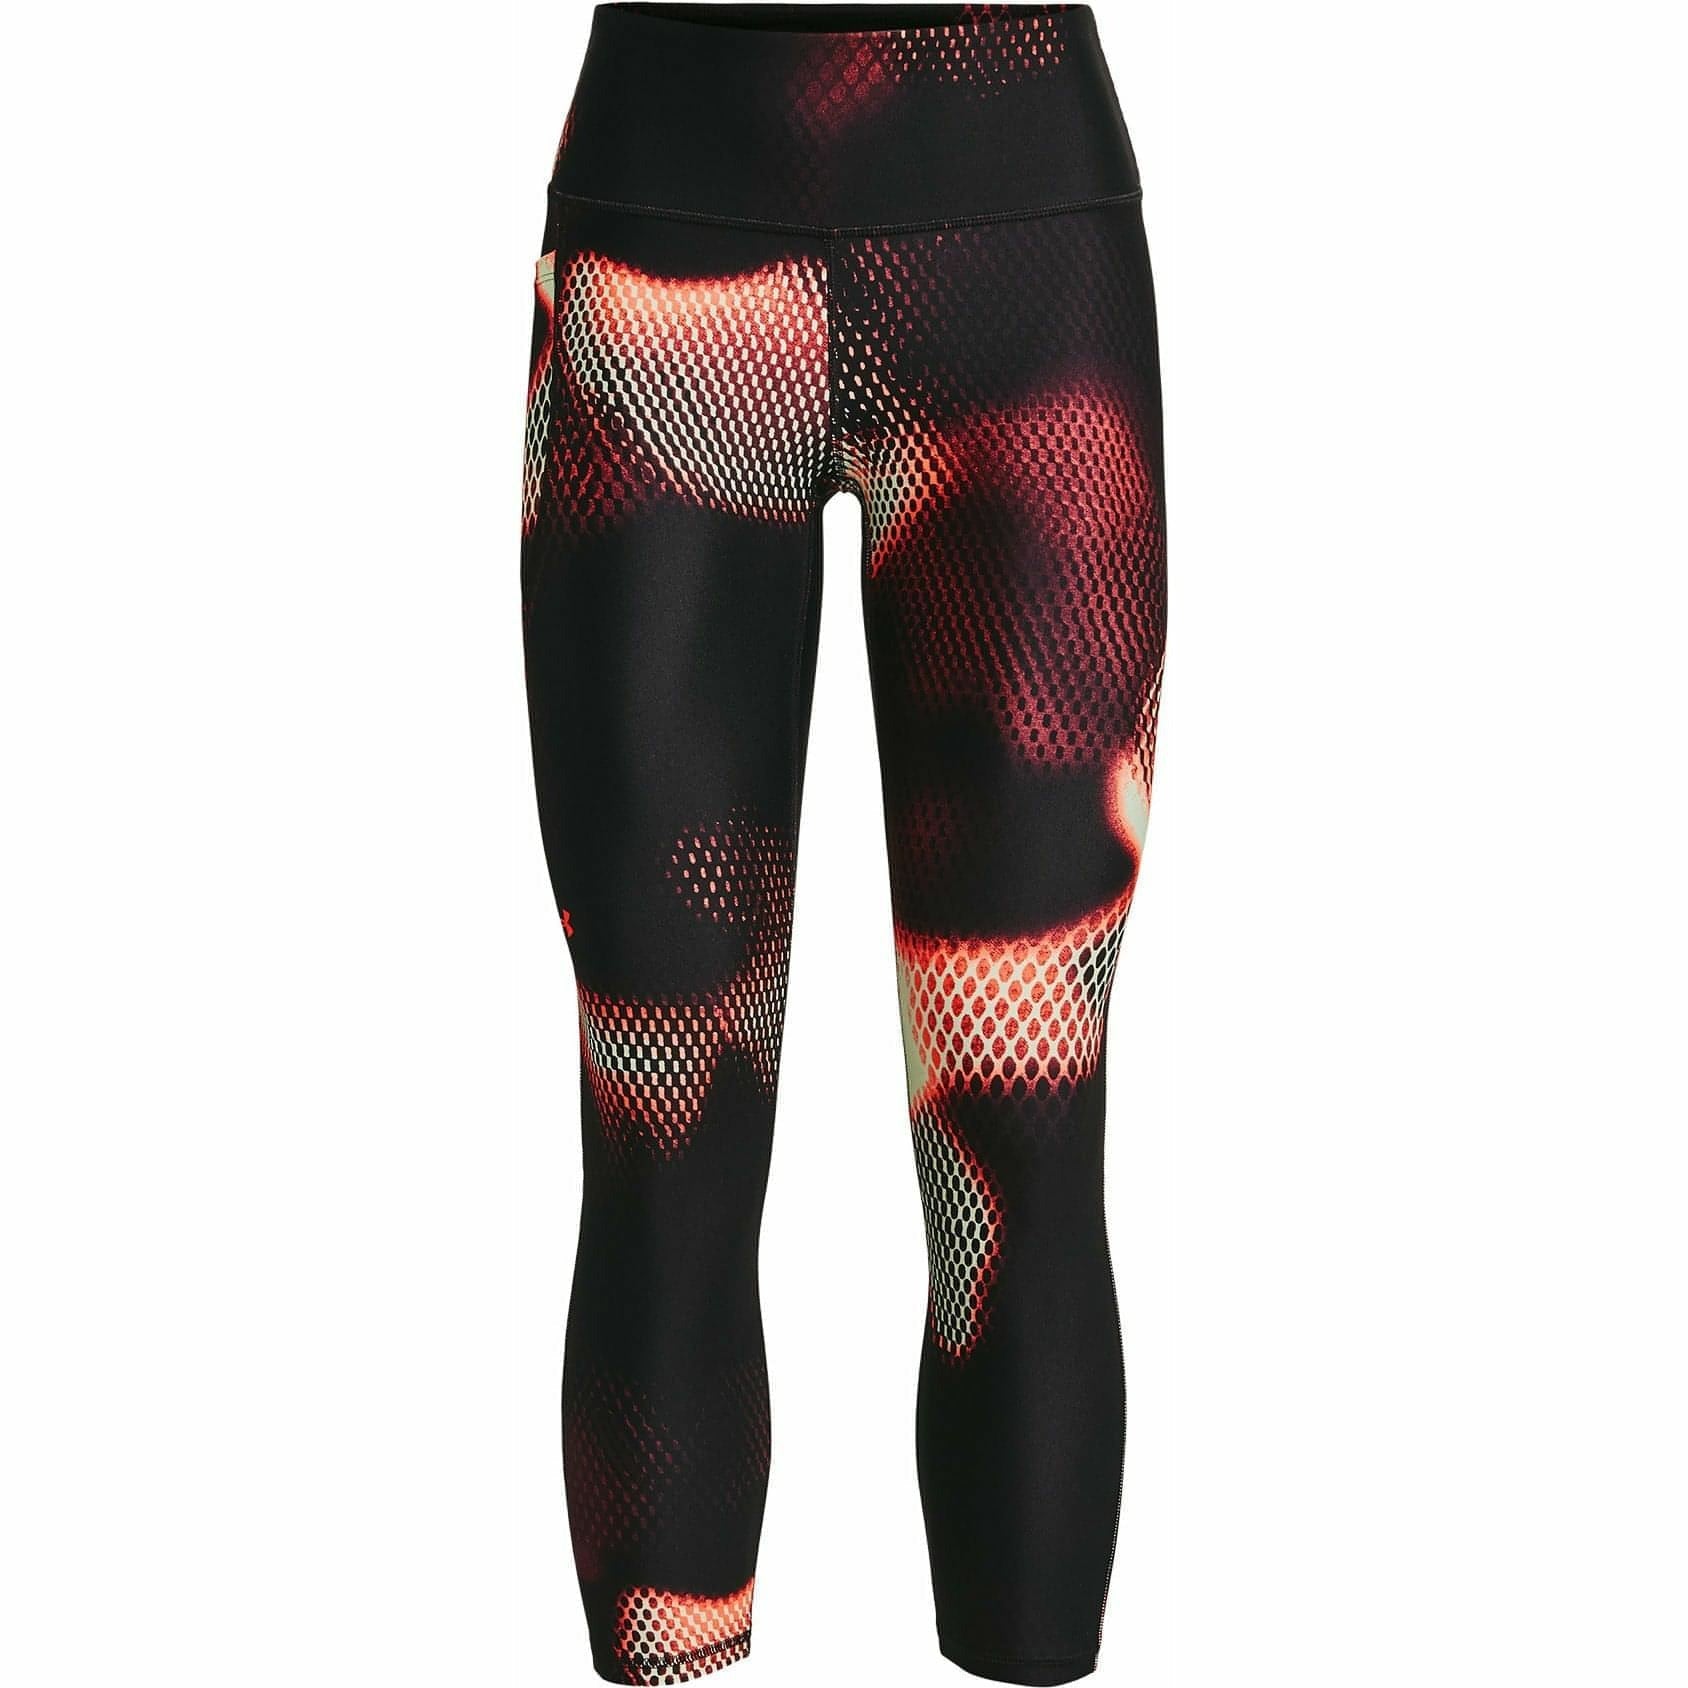 Under Armour Heatgear Printed Tights Front - Front View